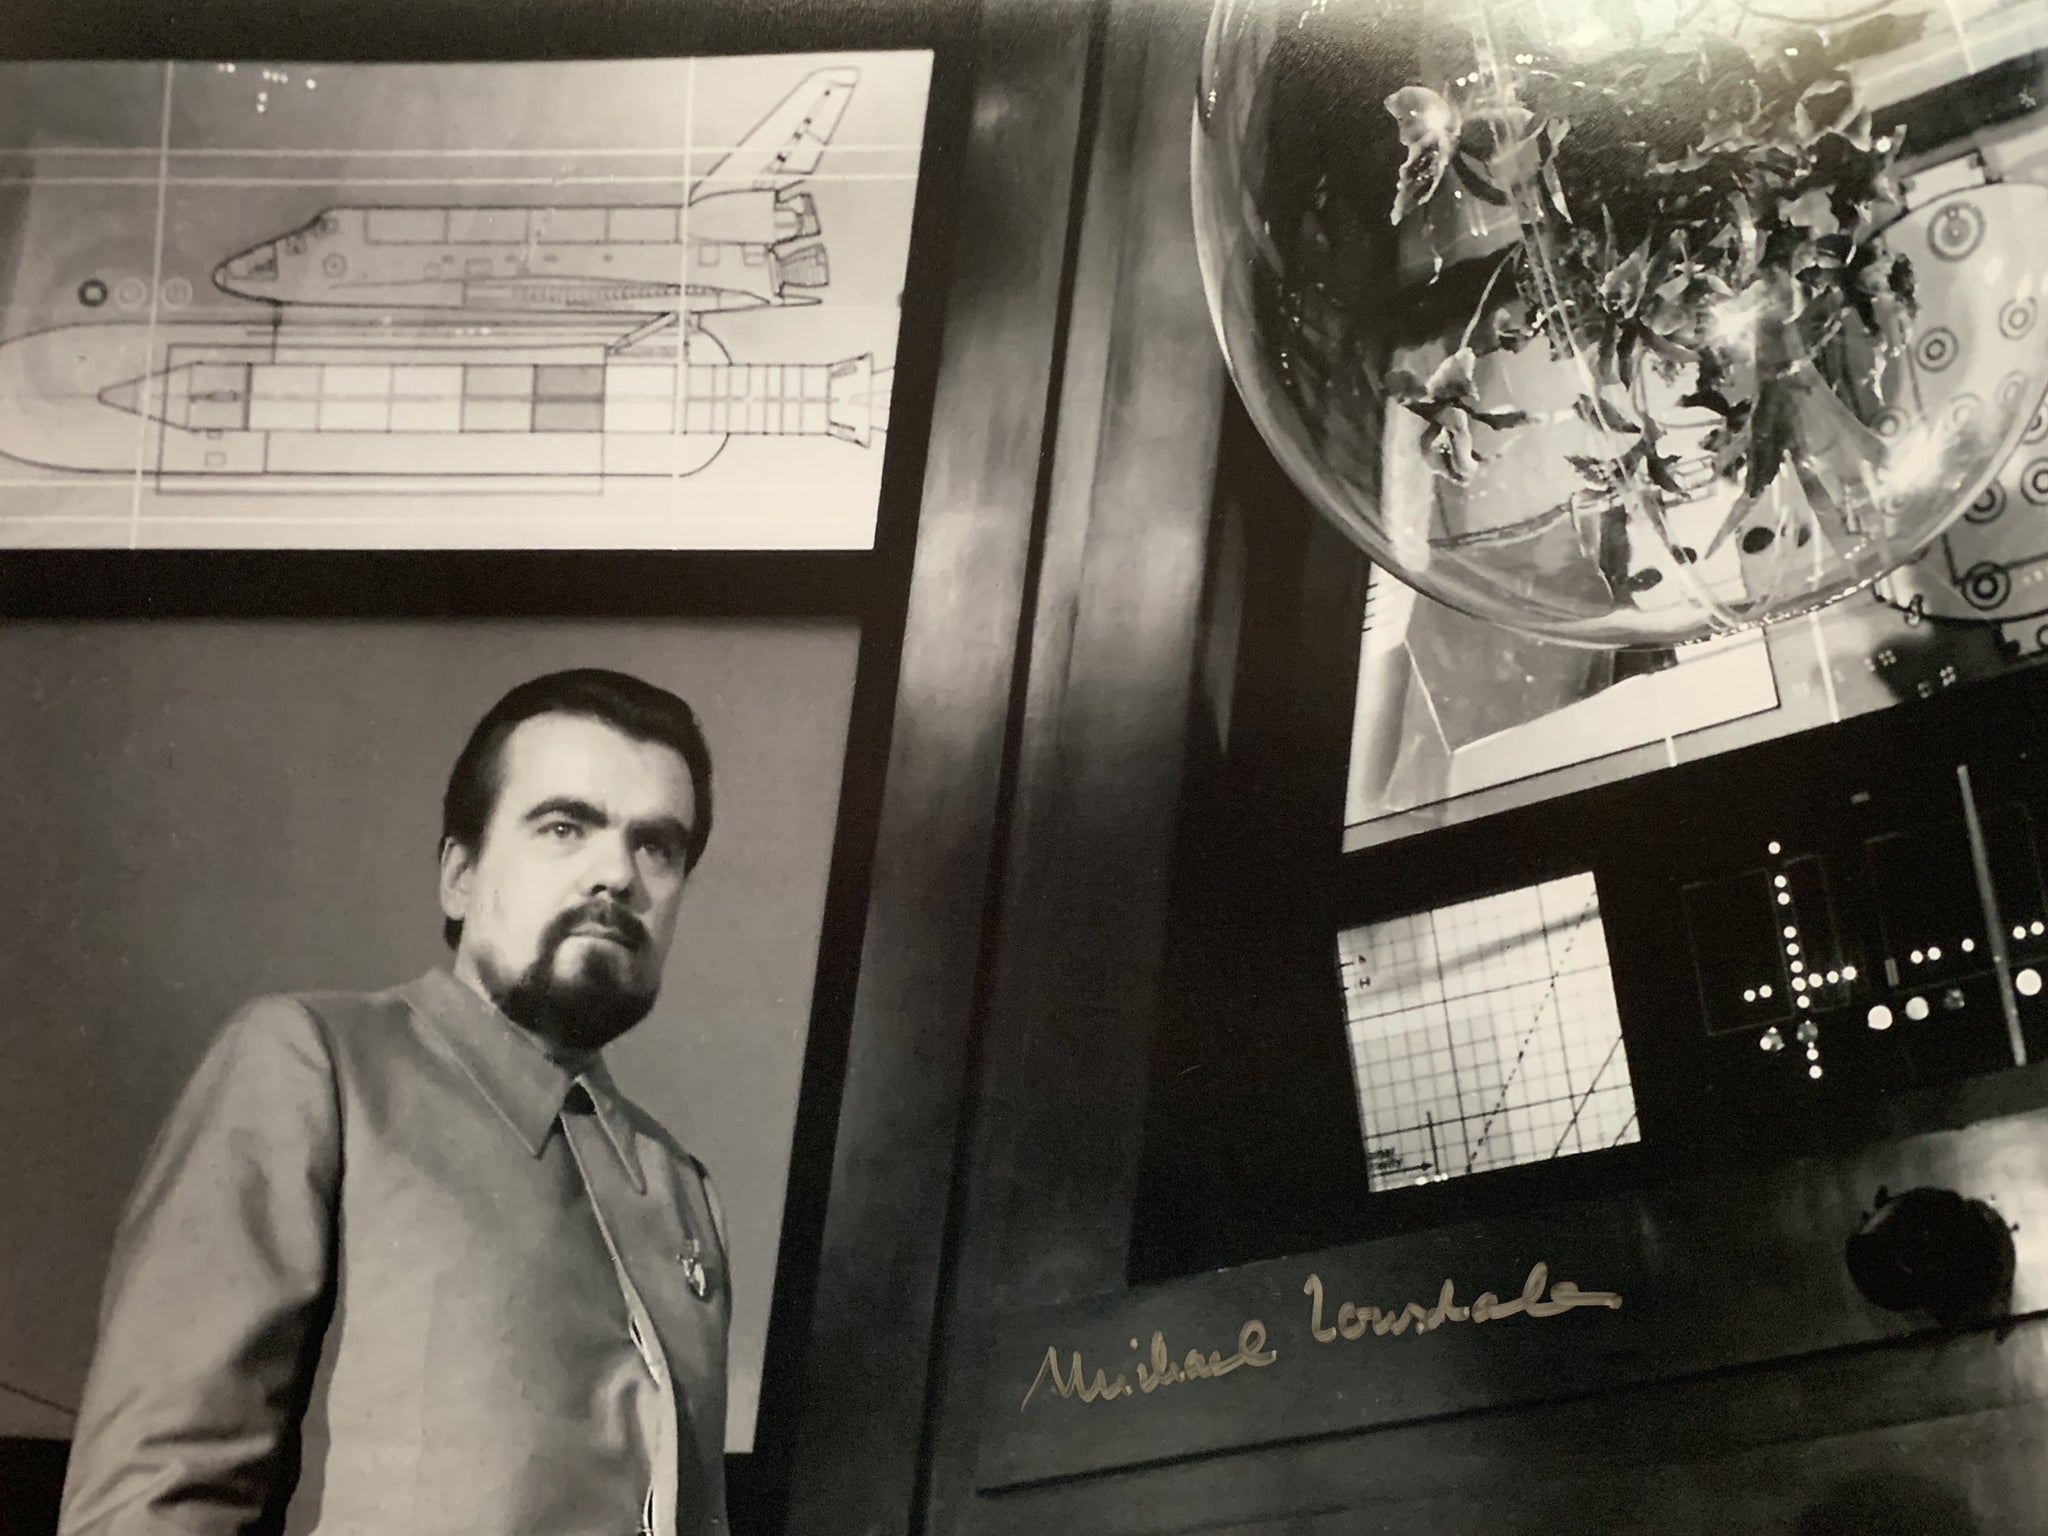 MICHAEL LONSDALE - Drax in James Bond Moonraker - 16 x 12 hand signed phot